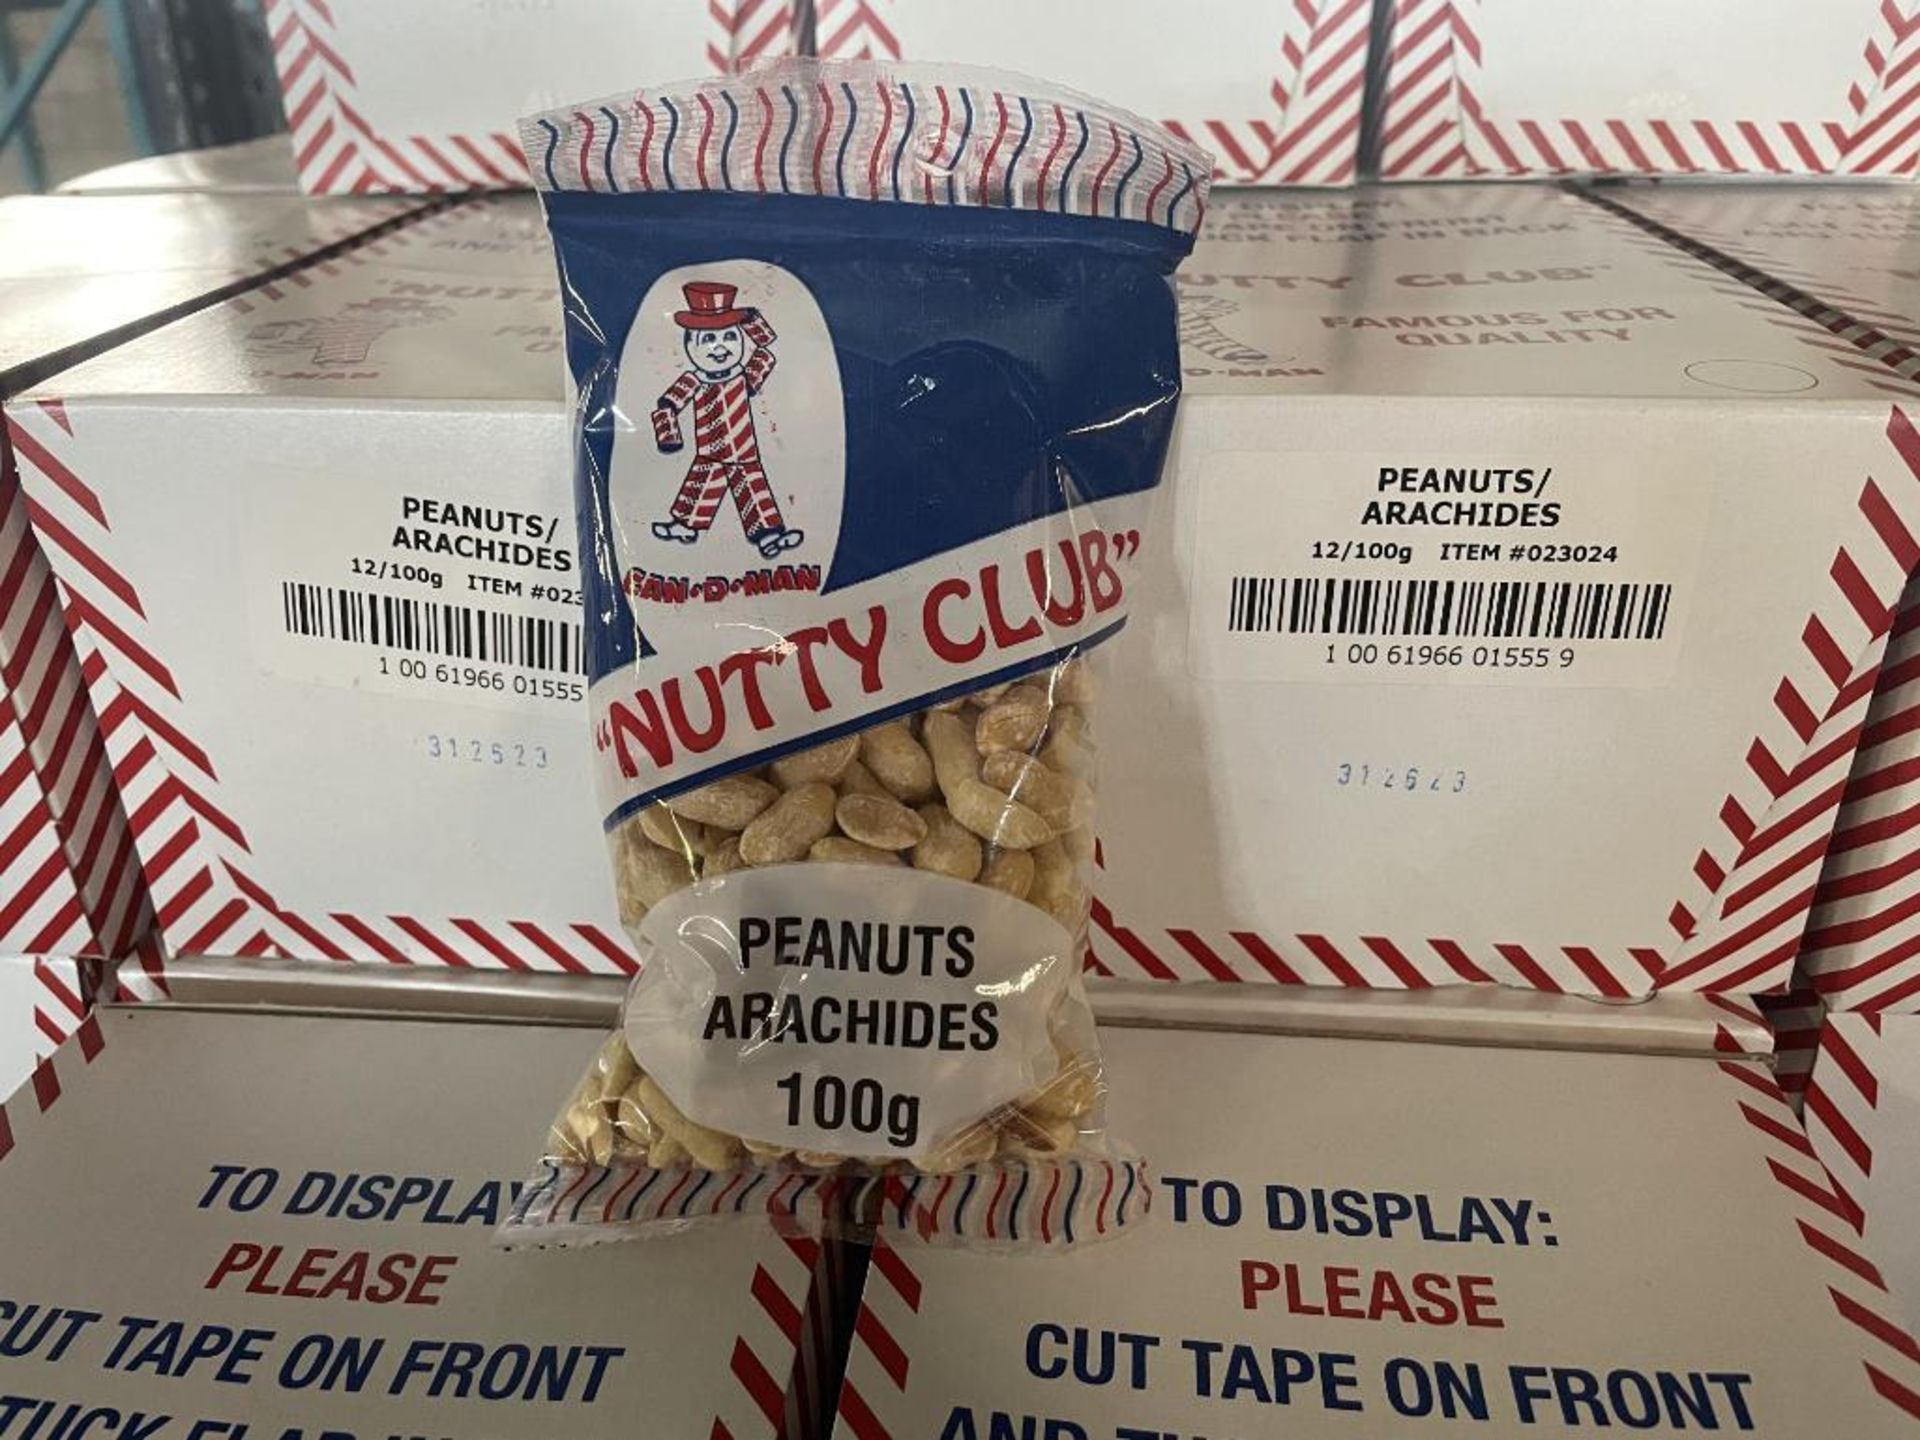 (21) BOXES OF NUTTY CLUB PEANUTS, 12/100G PER BOX - Image 2 of 4